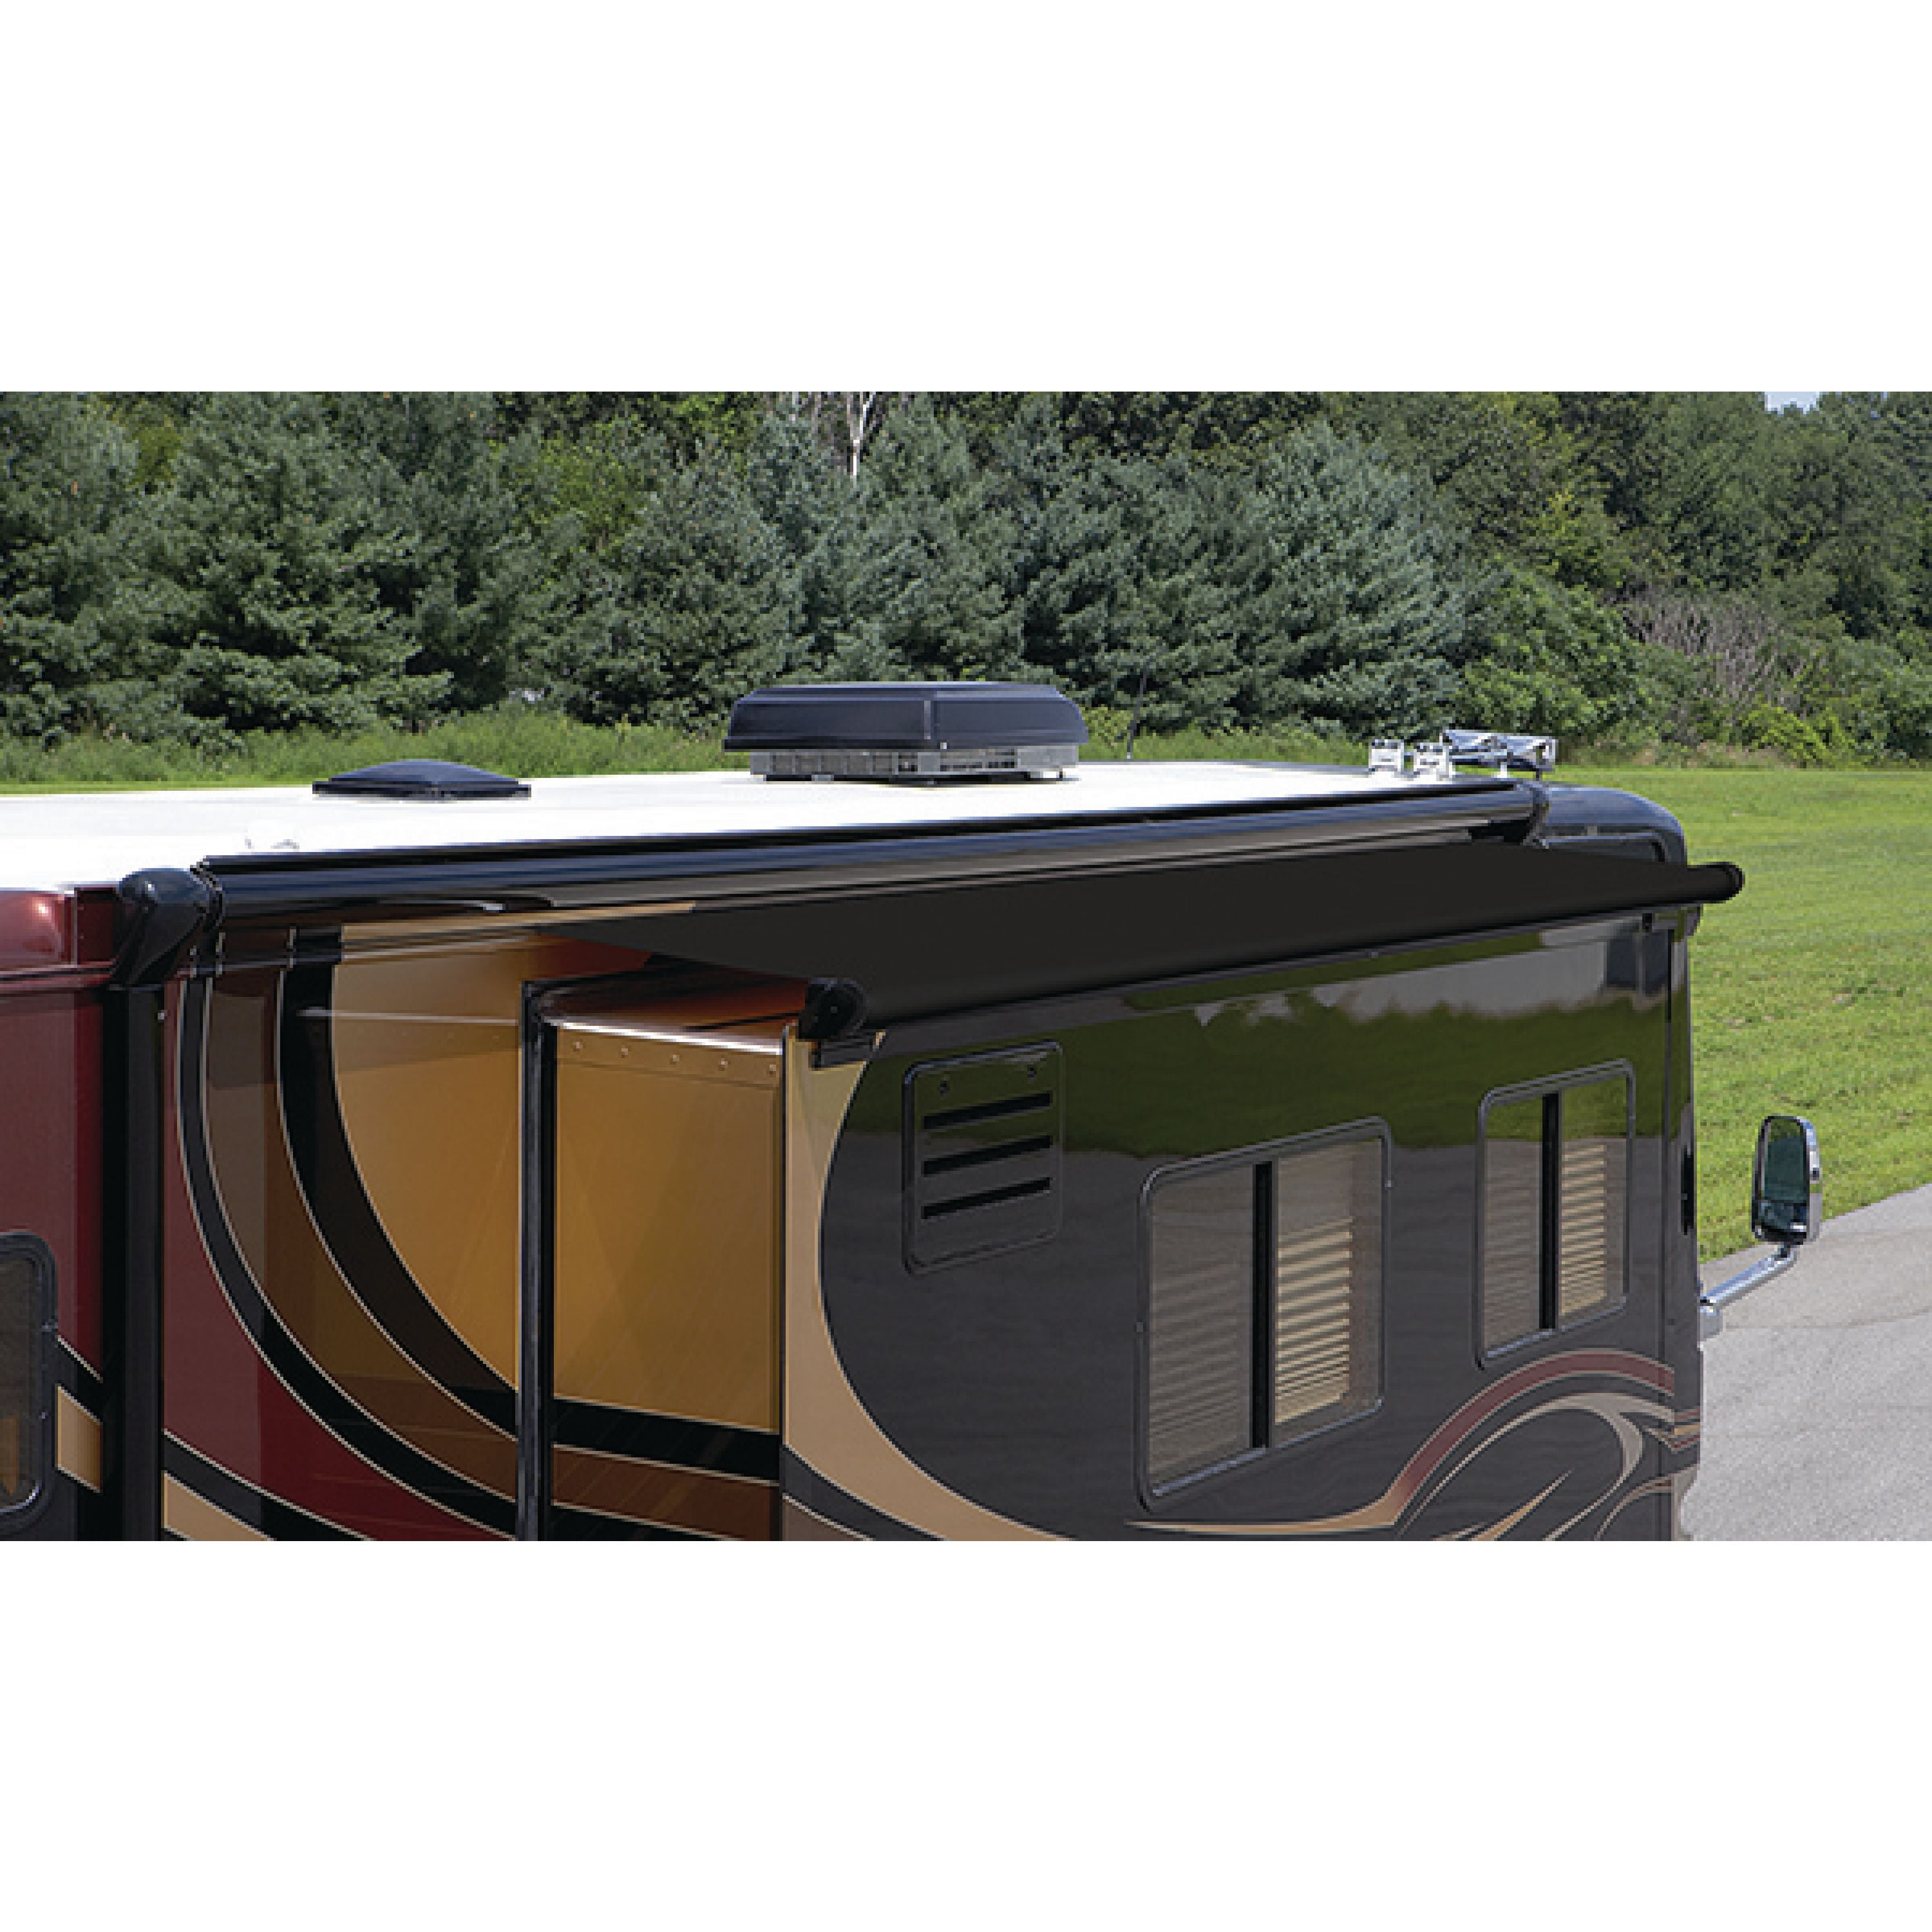 Carefree RV Slideout Awning Replacement Fabric 160 Canopy Length